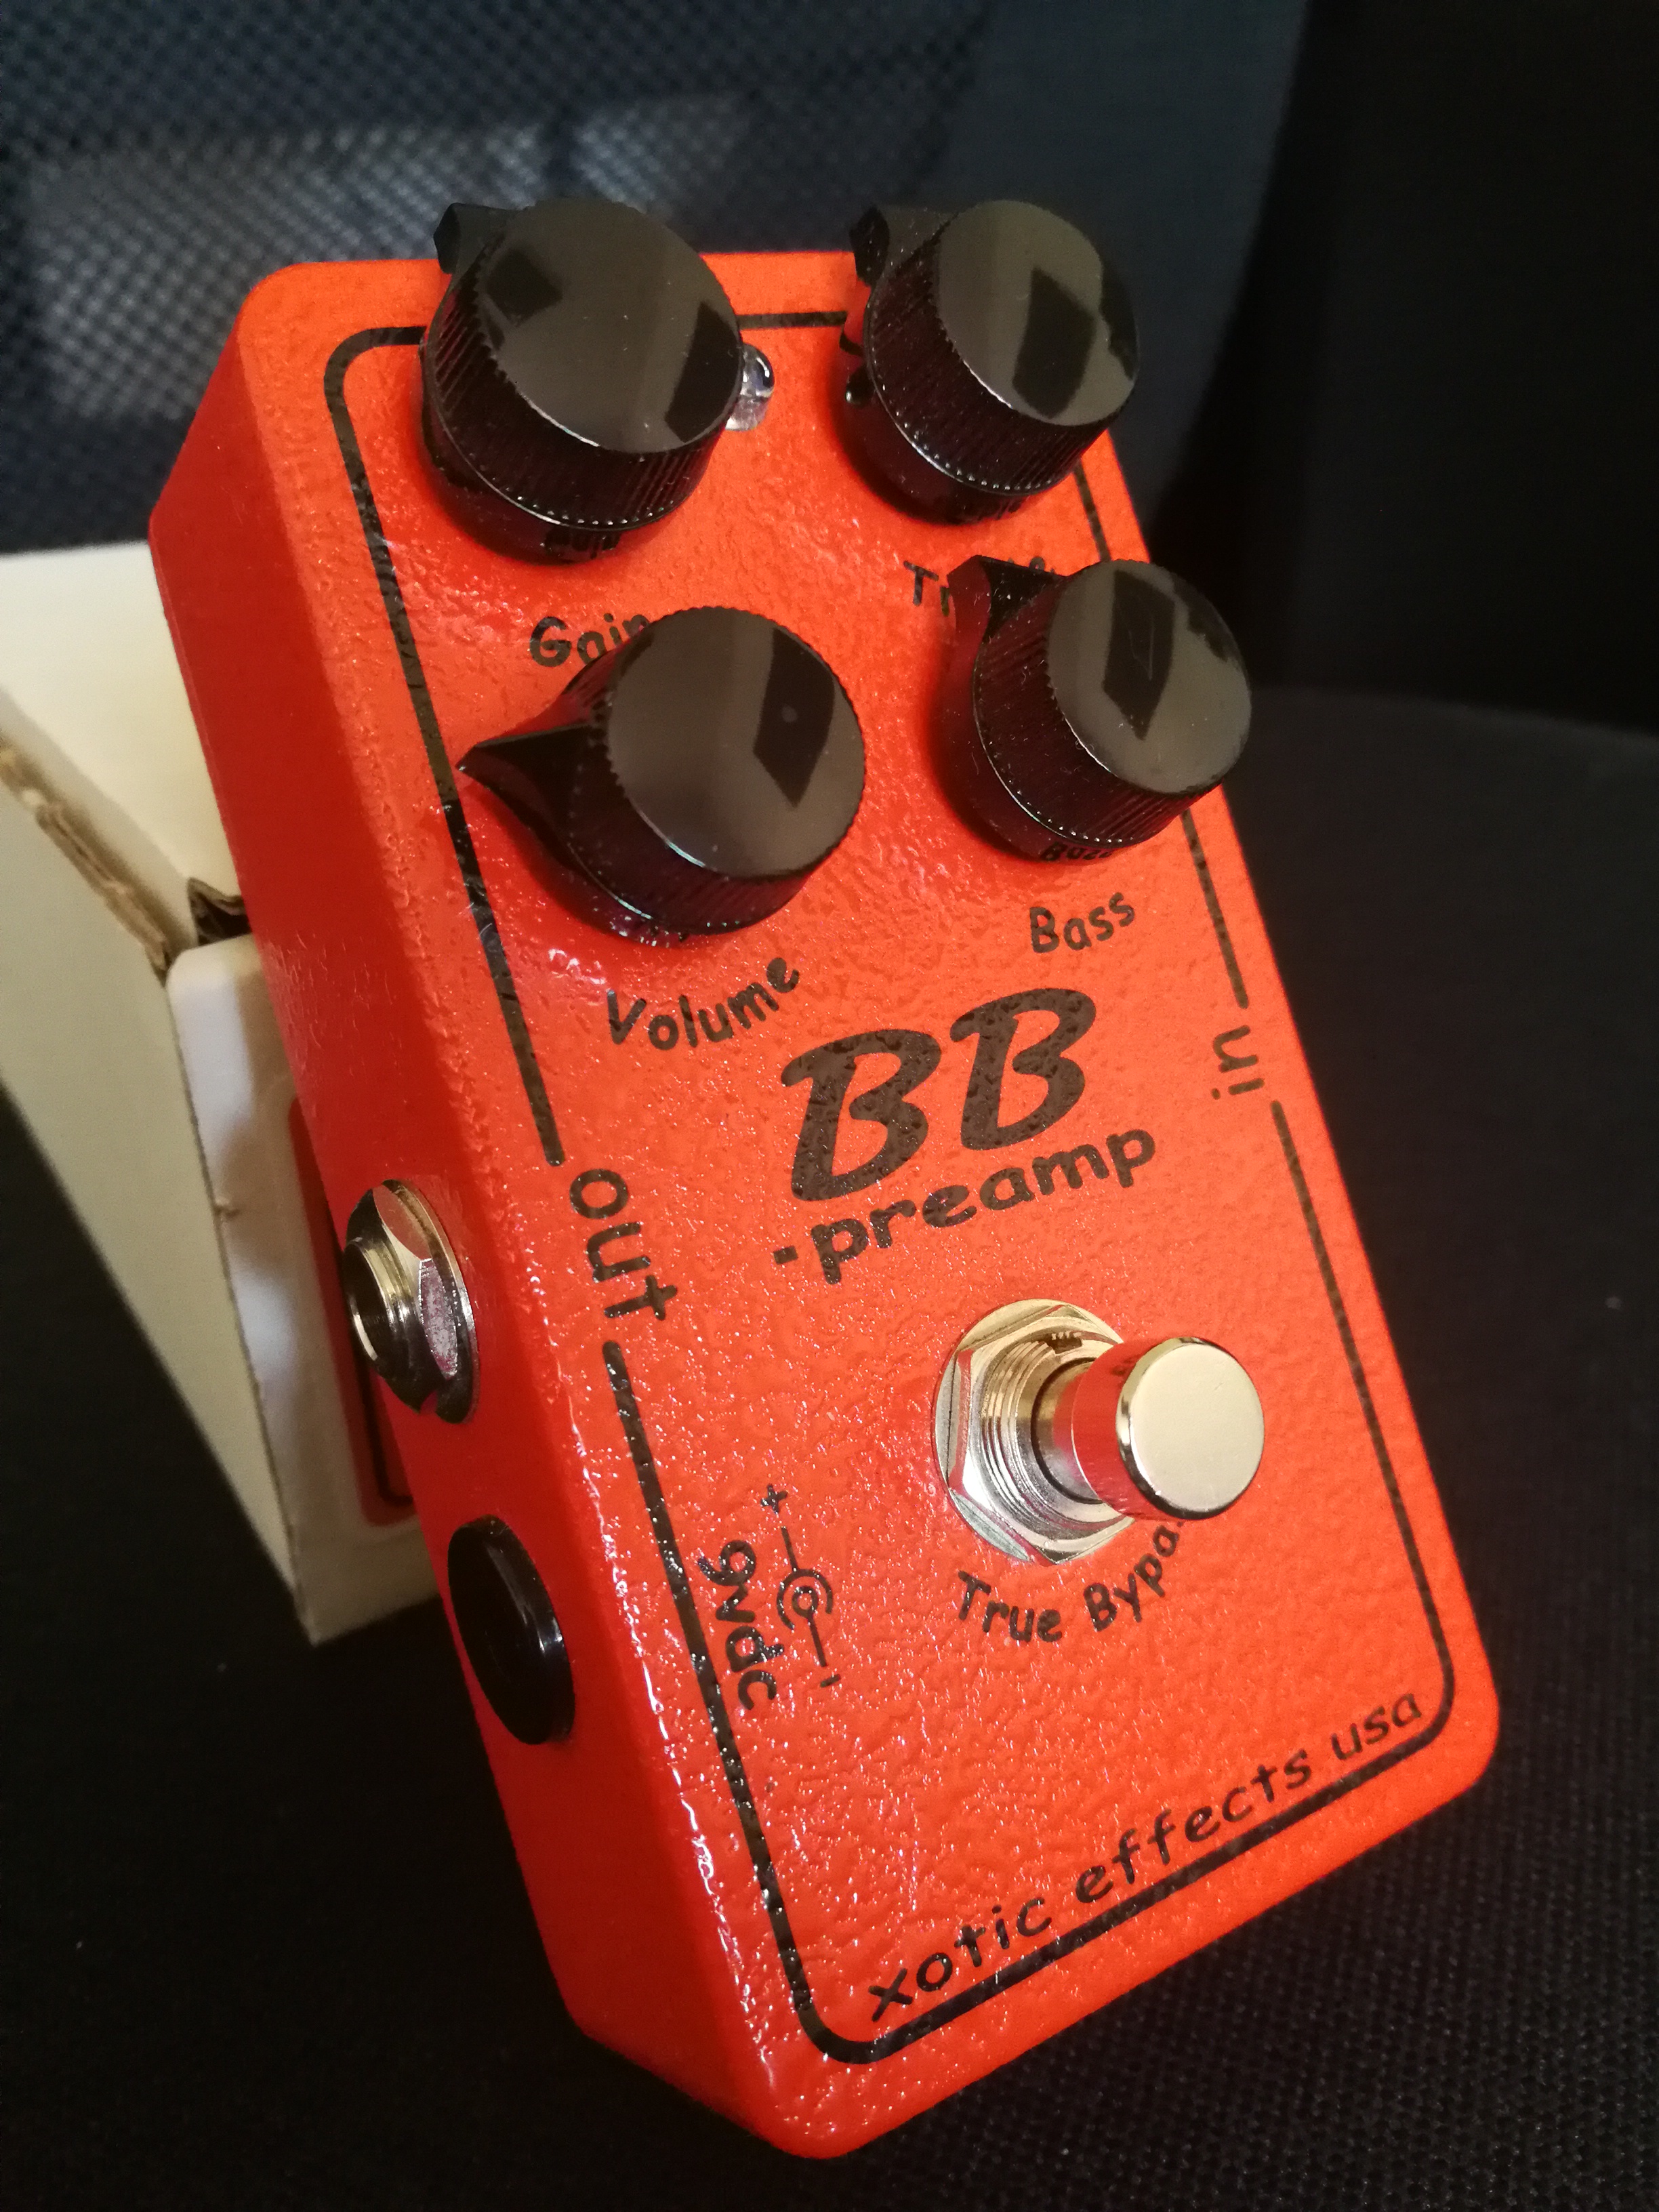 BB Preamp - Xotic Effects BB Preamp - Audiofanzine